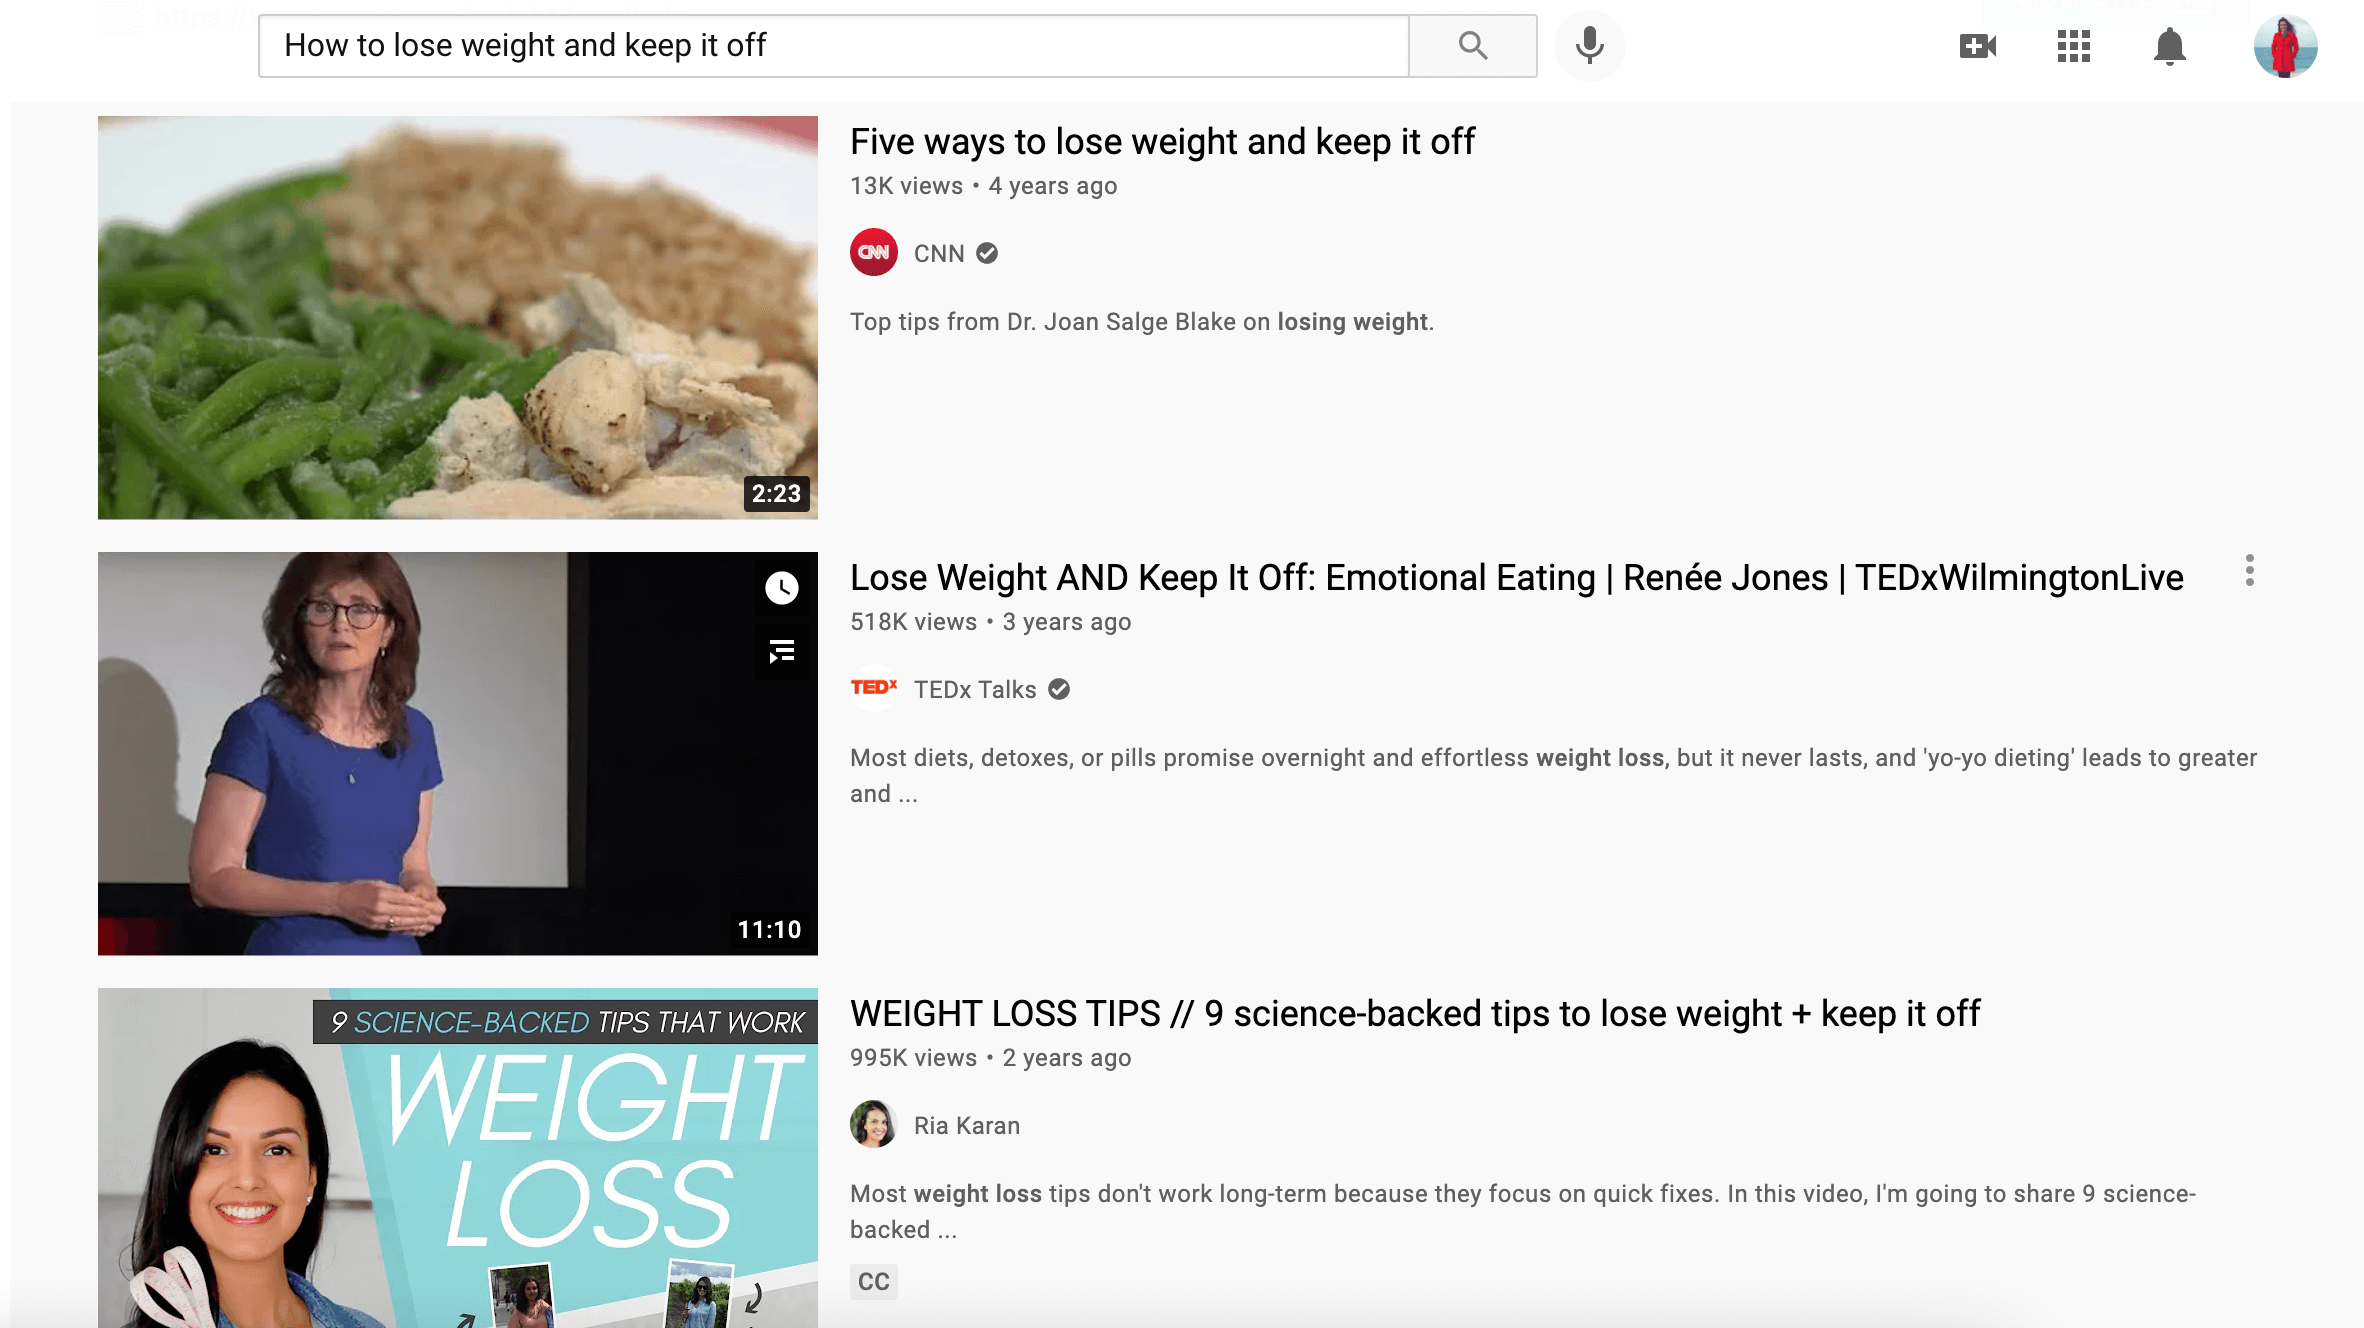 YouTube search results for how to lose weight and keep it off